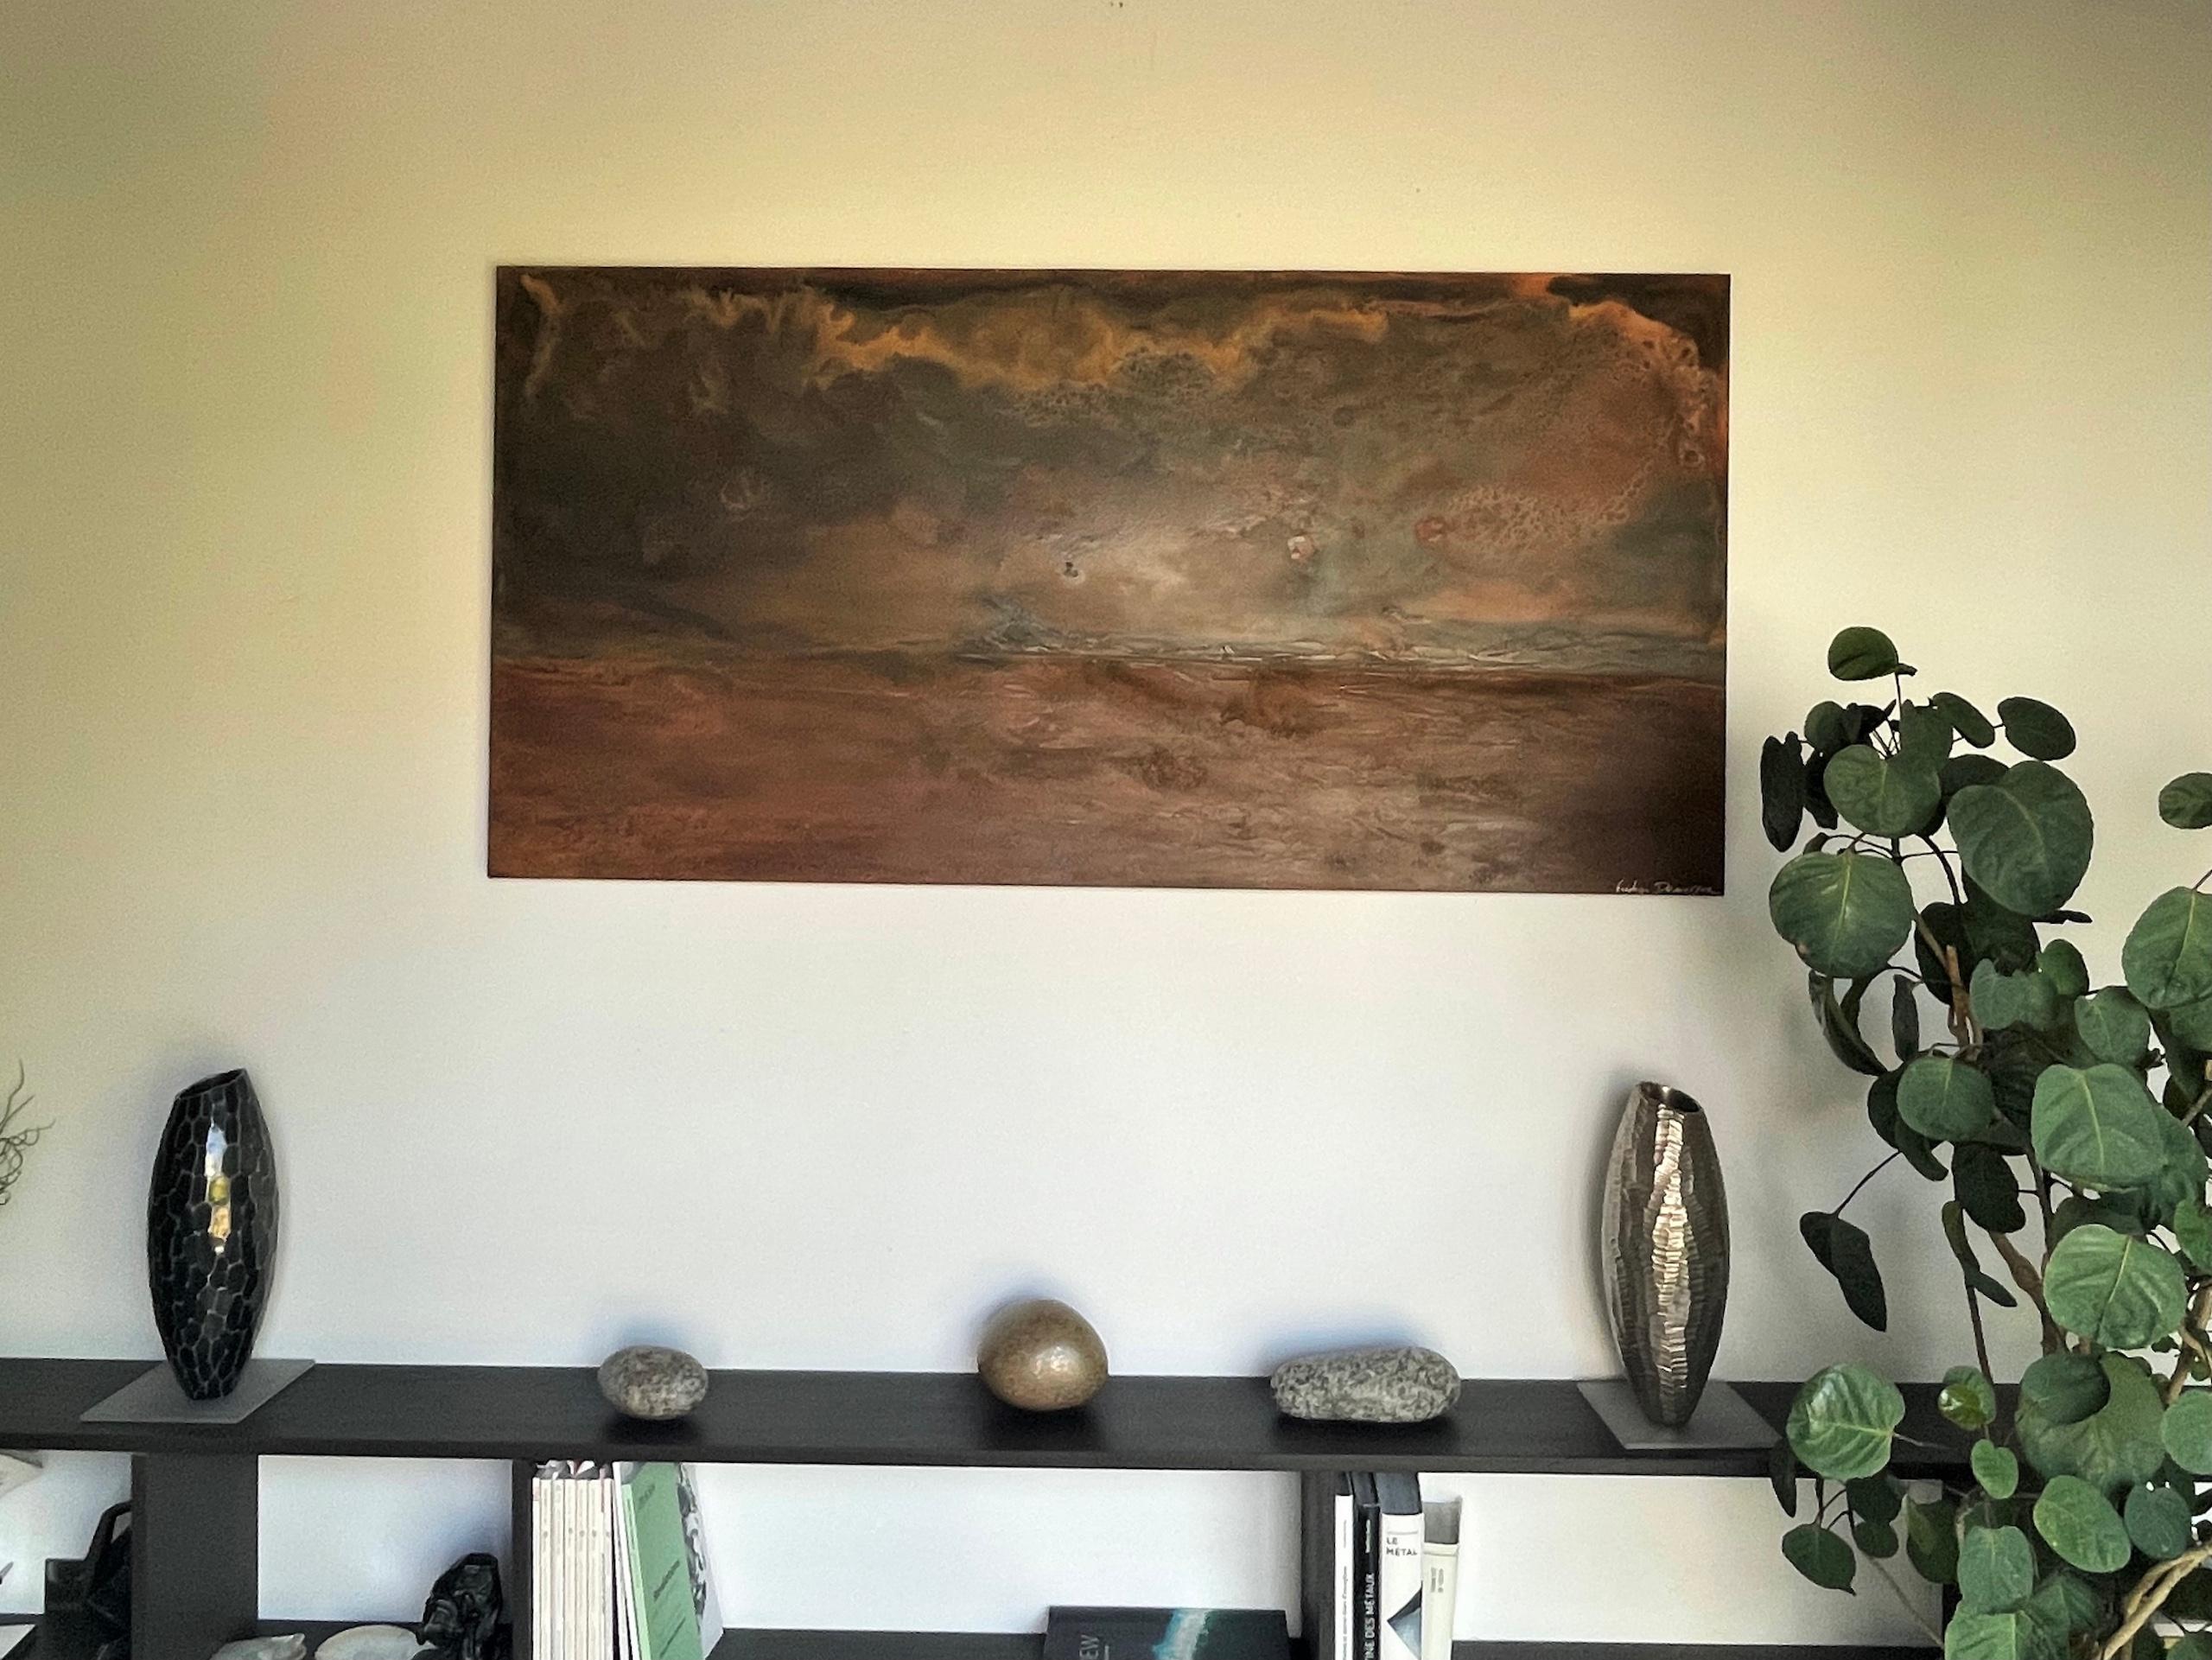 Infinity on Danakil is a unique painting by French contemporary artist Frédérique Domergue. This painting is made with oxidized zinc and bronze leaves on aluminium panel, patina fixed with beeswax, dimensions are 75 × 150 cm (29.5 × 59.1 in).
The